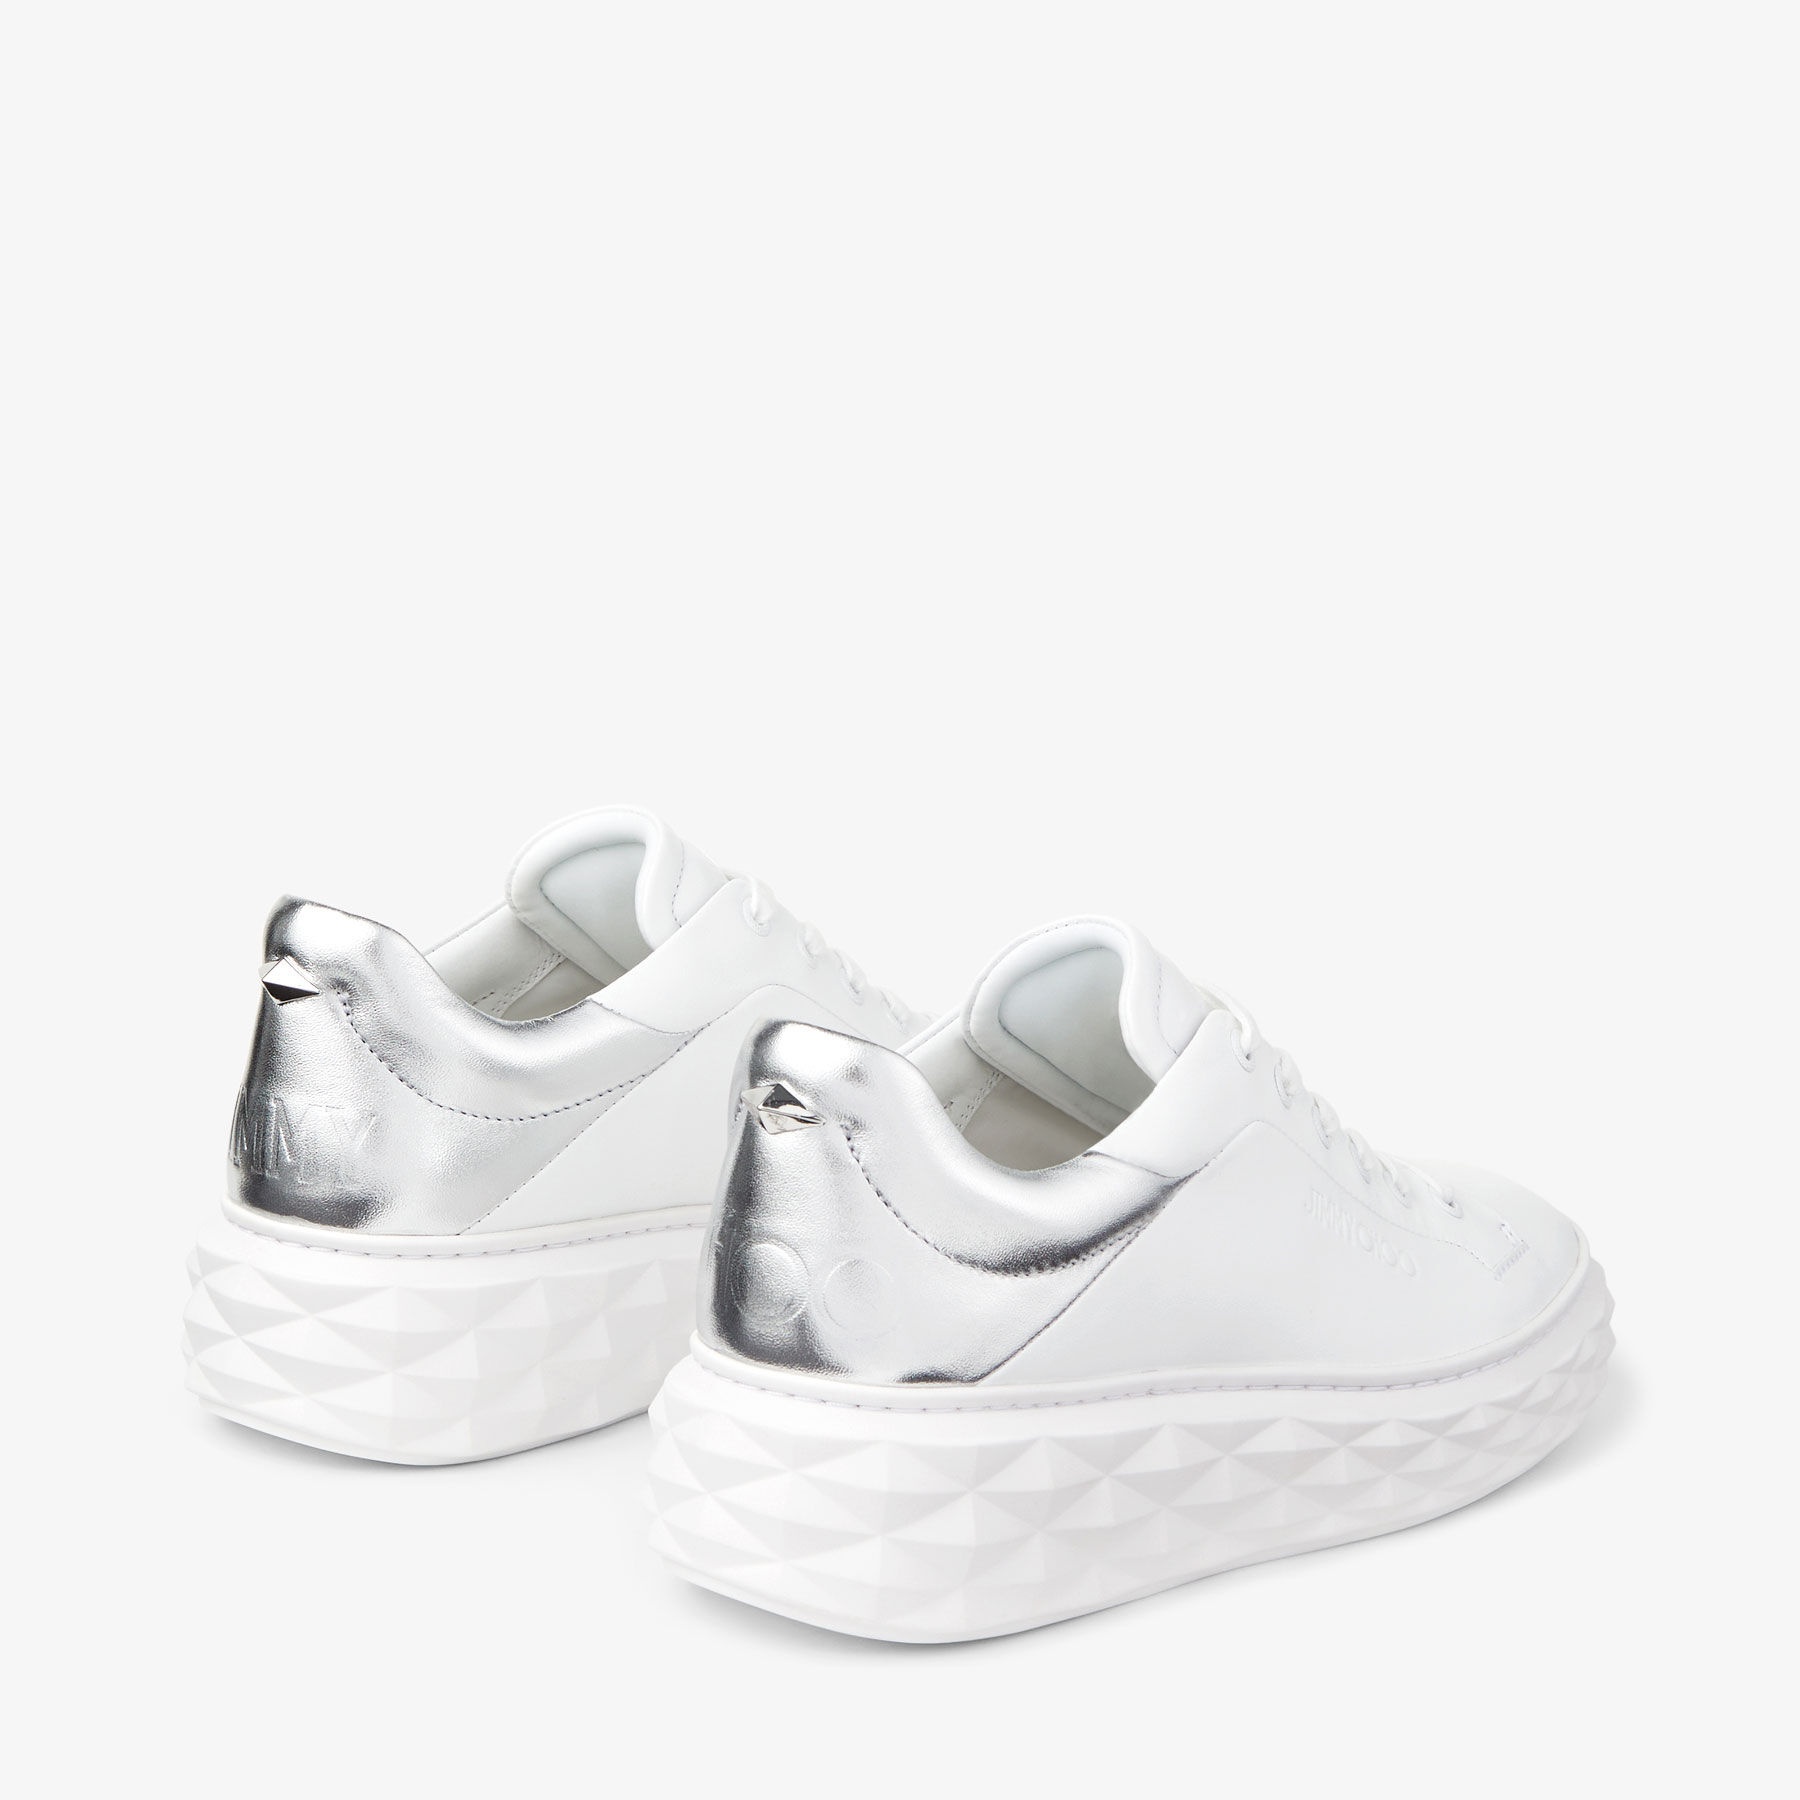 Diamond Maxi/f Ii
White and Silver Leather Trainers with Platform Sole - 6